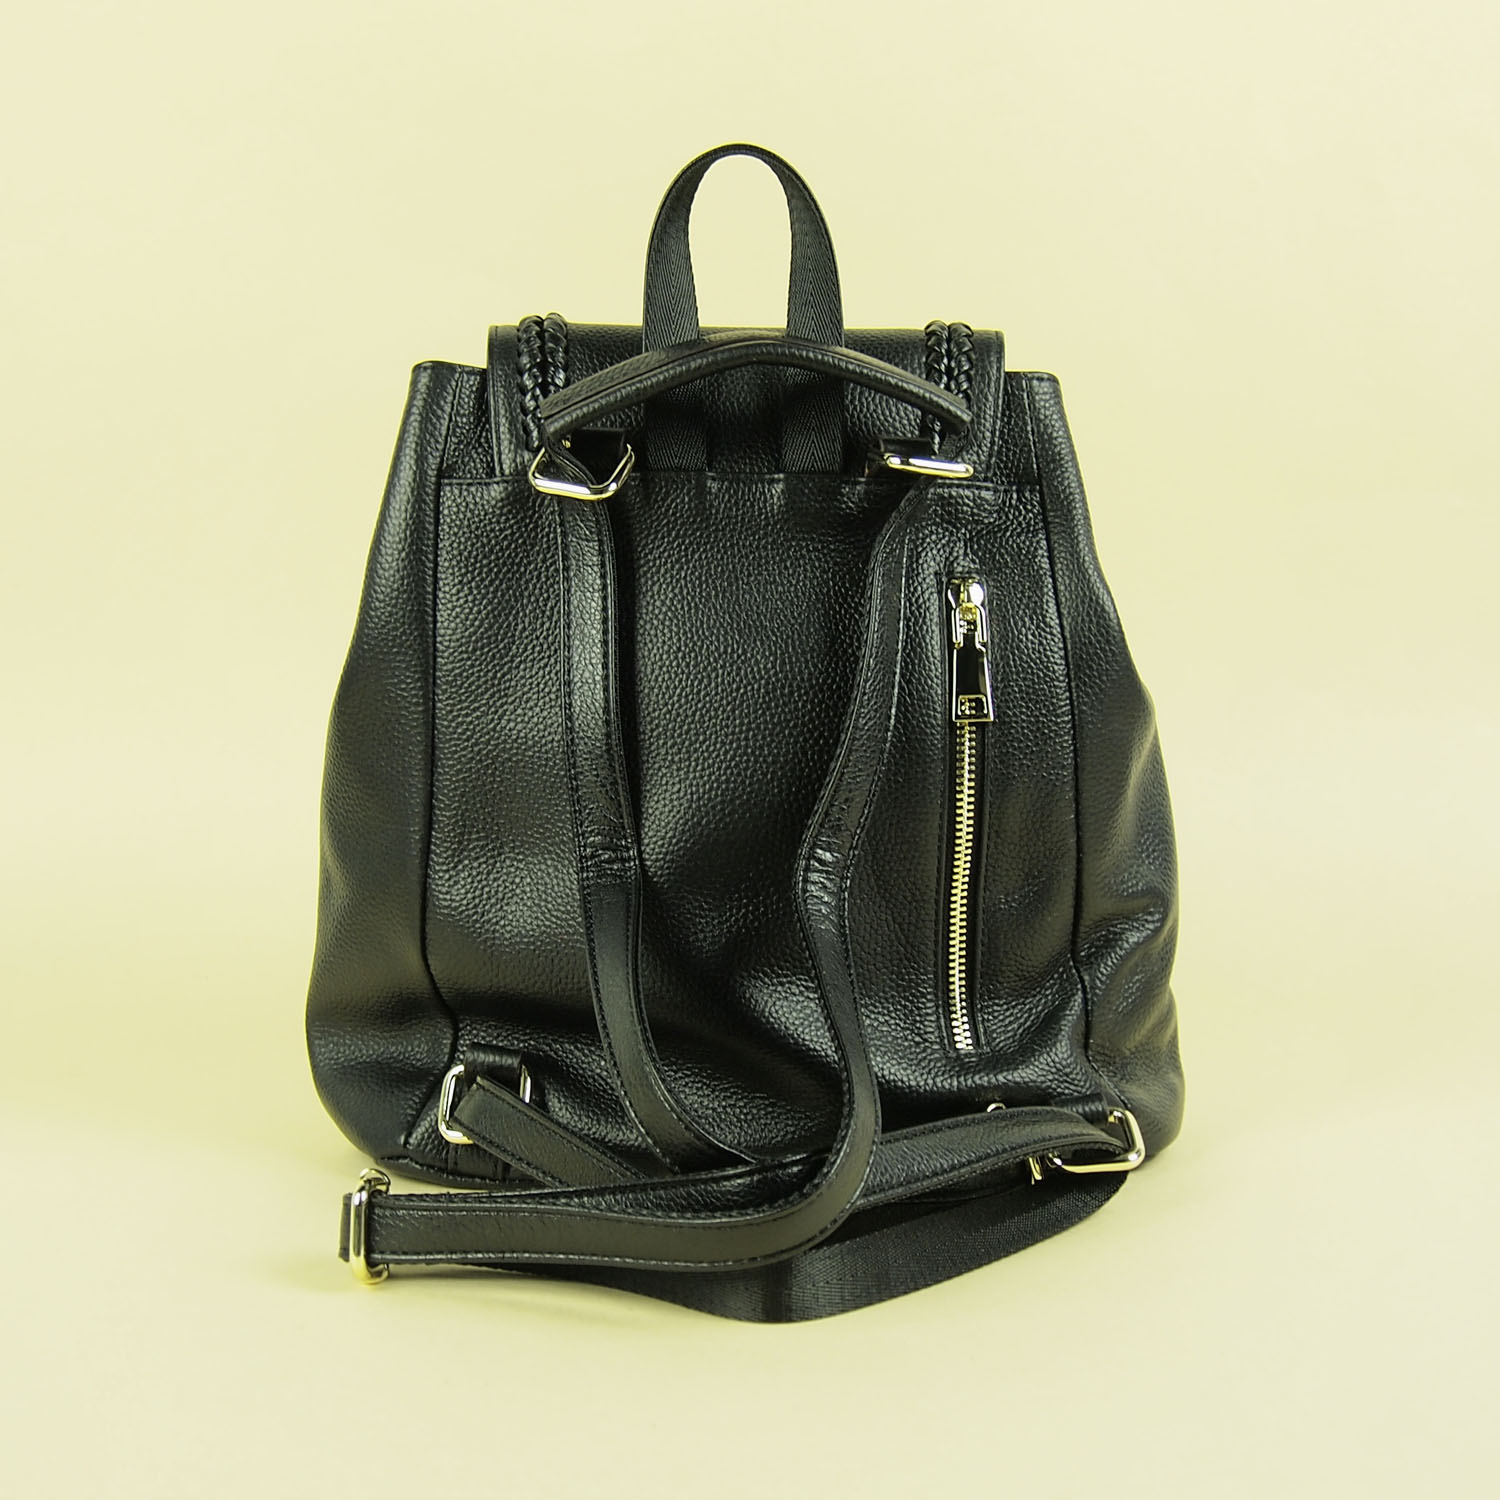 Super Urban Forest Muriel Backpack Rear View